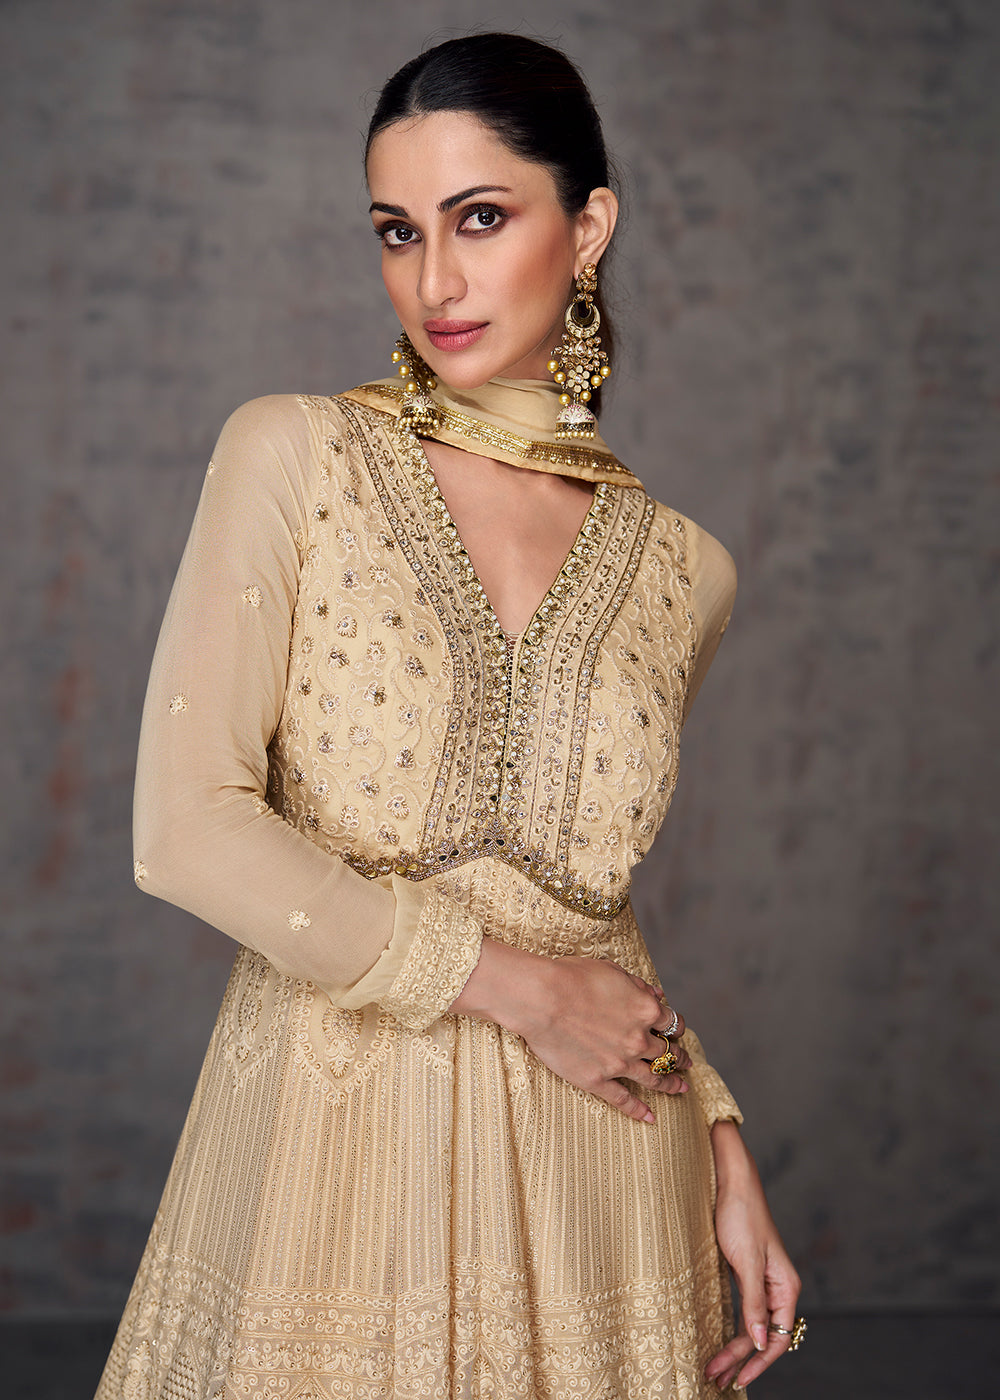 Buy Now Sequins & Faux Mirror Embroidered Indian Wedding Gown in Beige Online in USA, UK, Australia, Canada & Worldwide at Empress Clothing. 